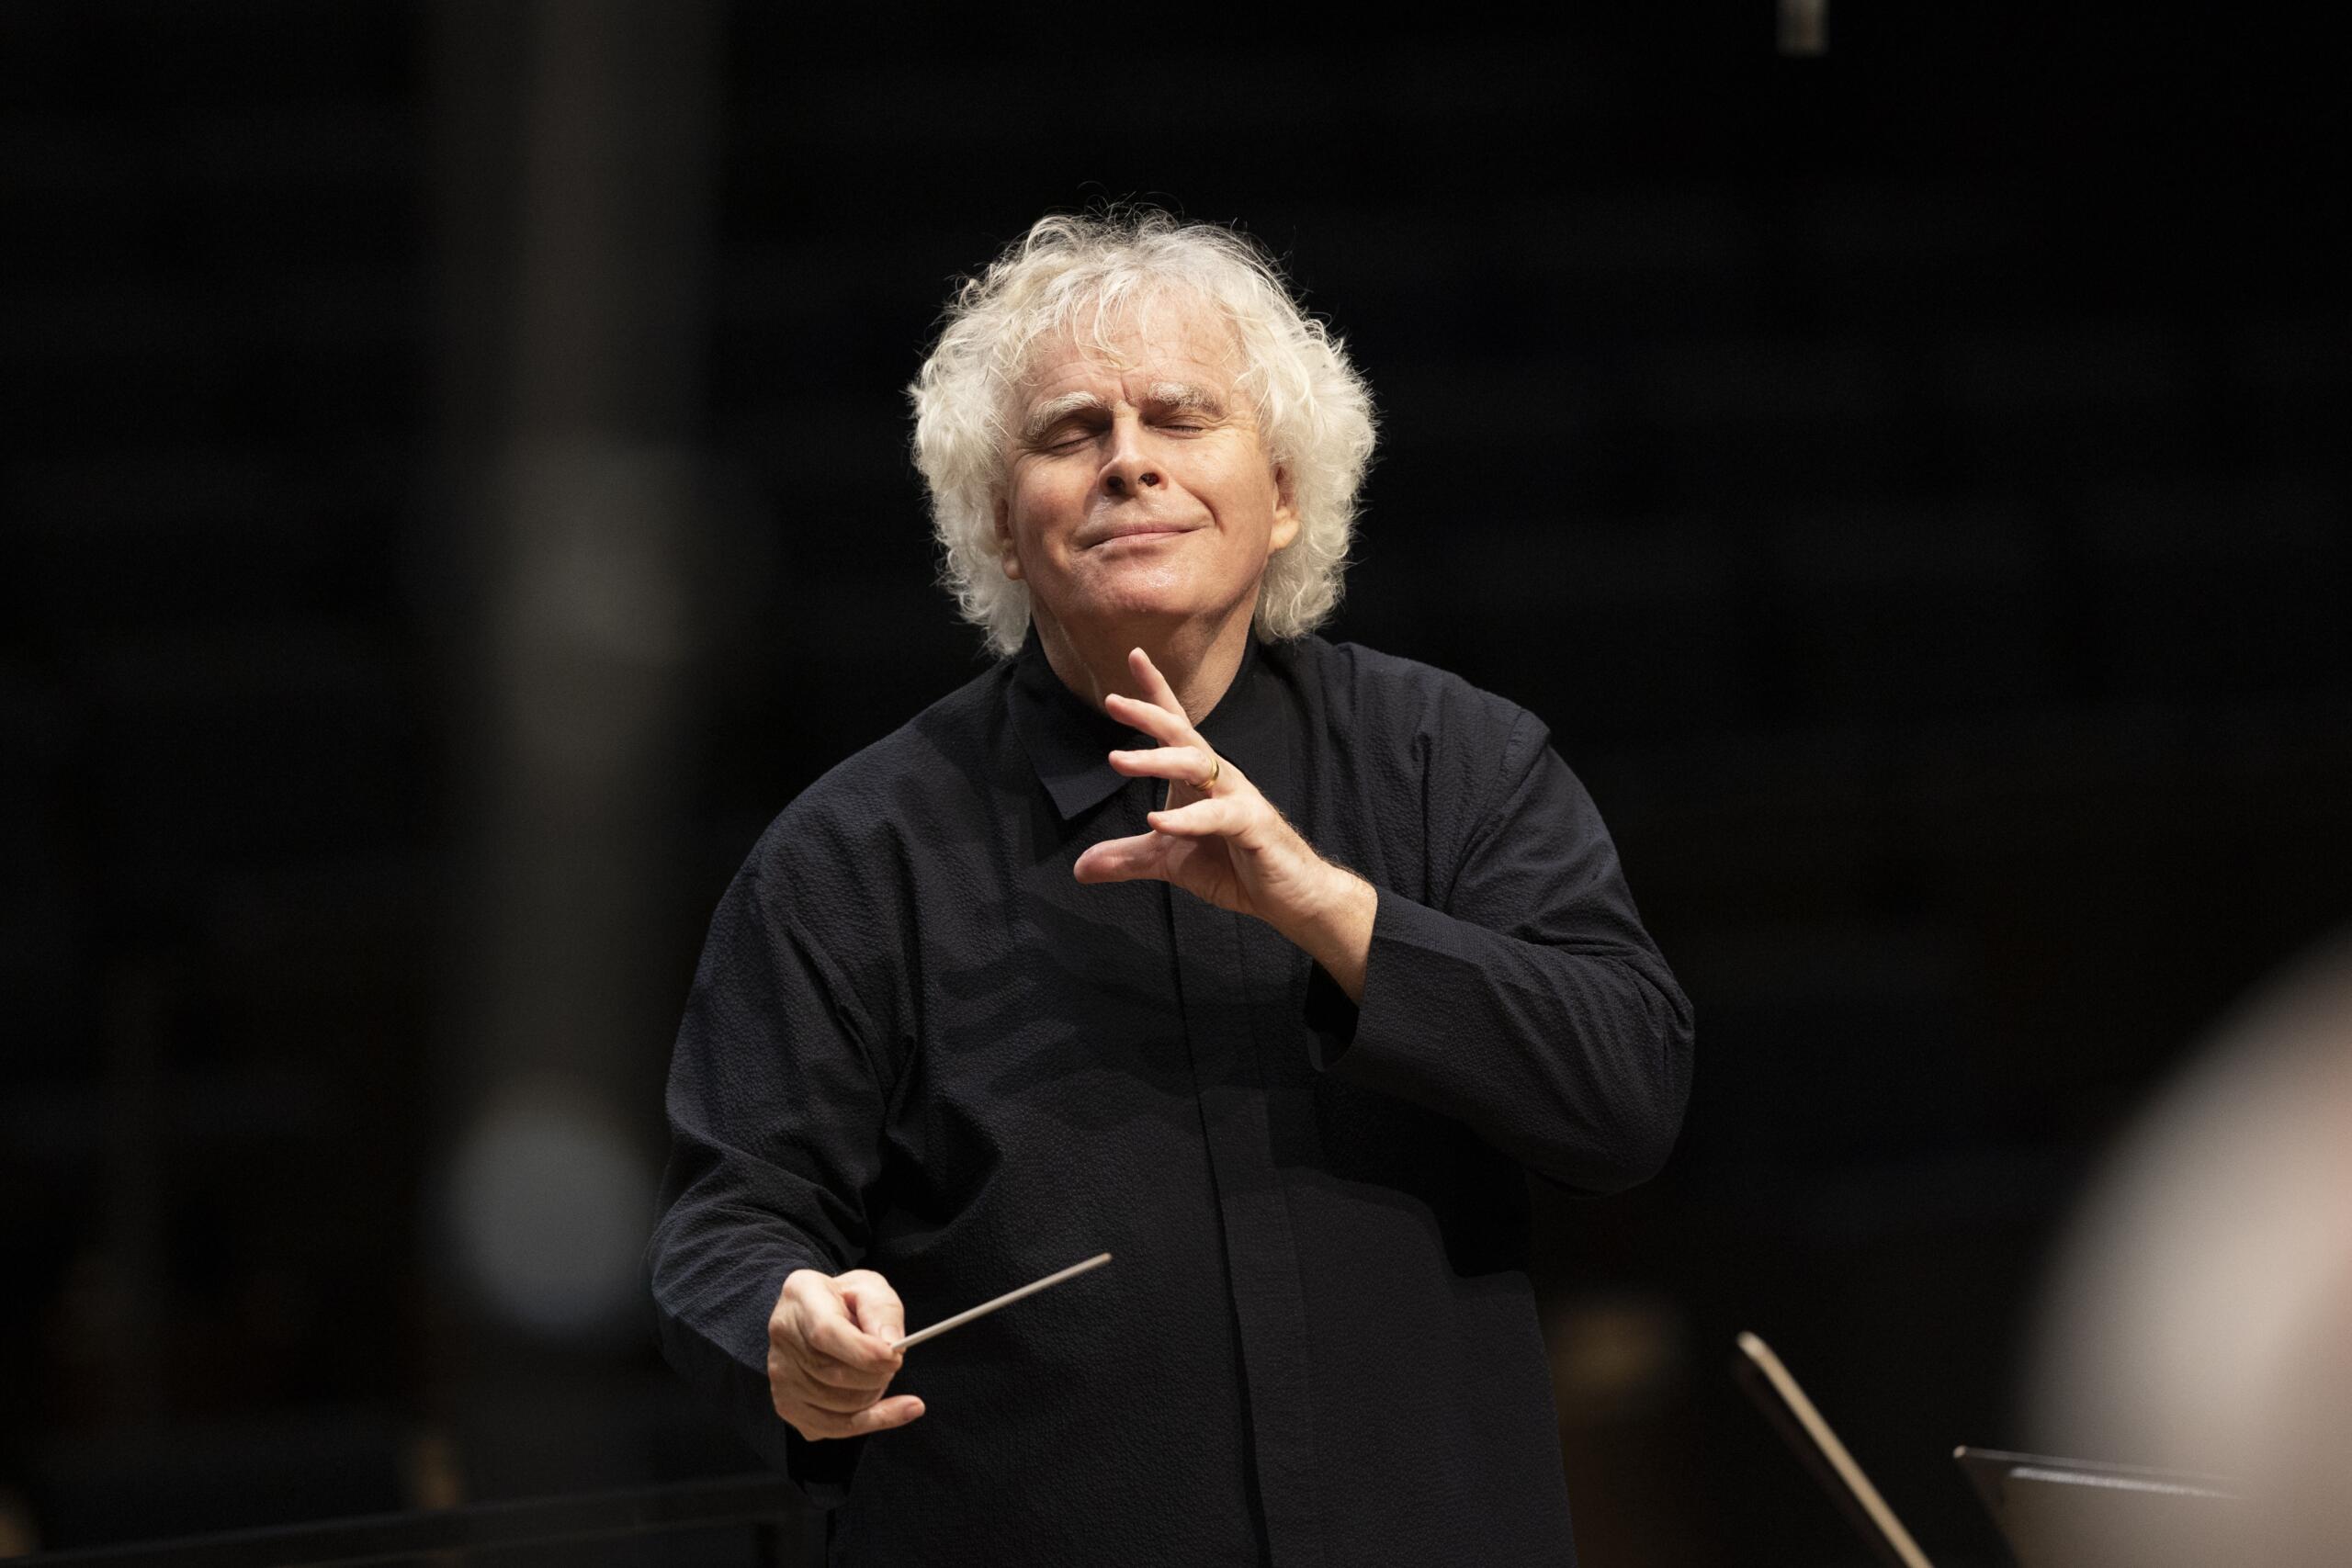 Conductor Rattle in black shirt conducting with his eyes closed.